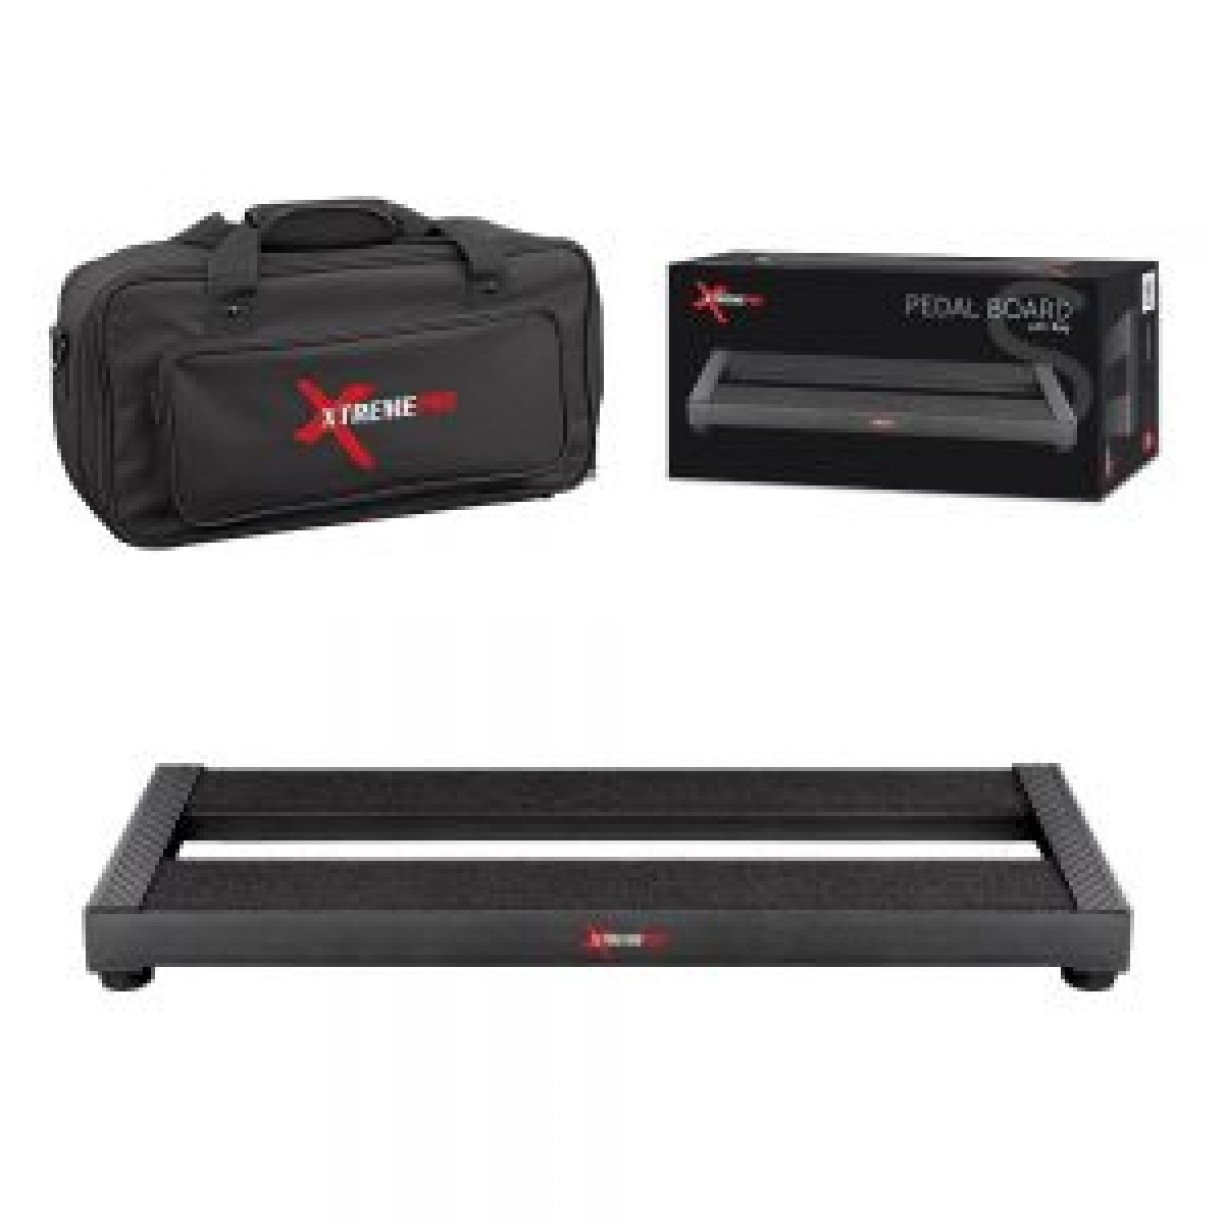 Xtreme Pro XPB3715 Pedal Board - Small with Bag.